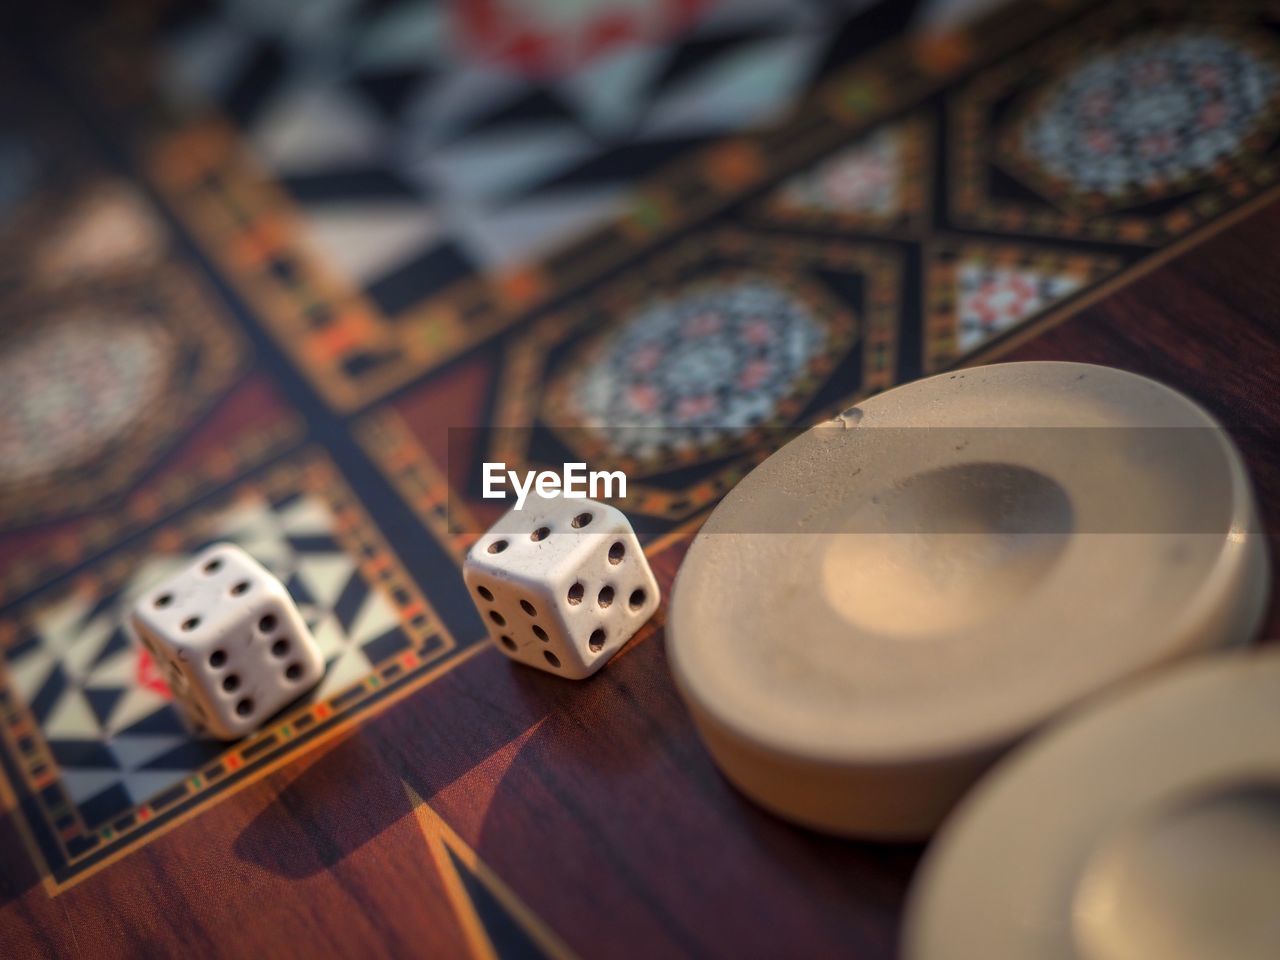 High angle view of dices on wooden table